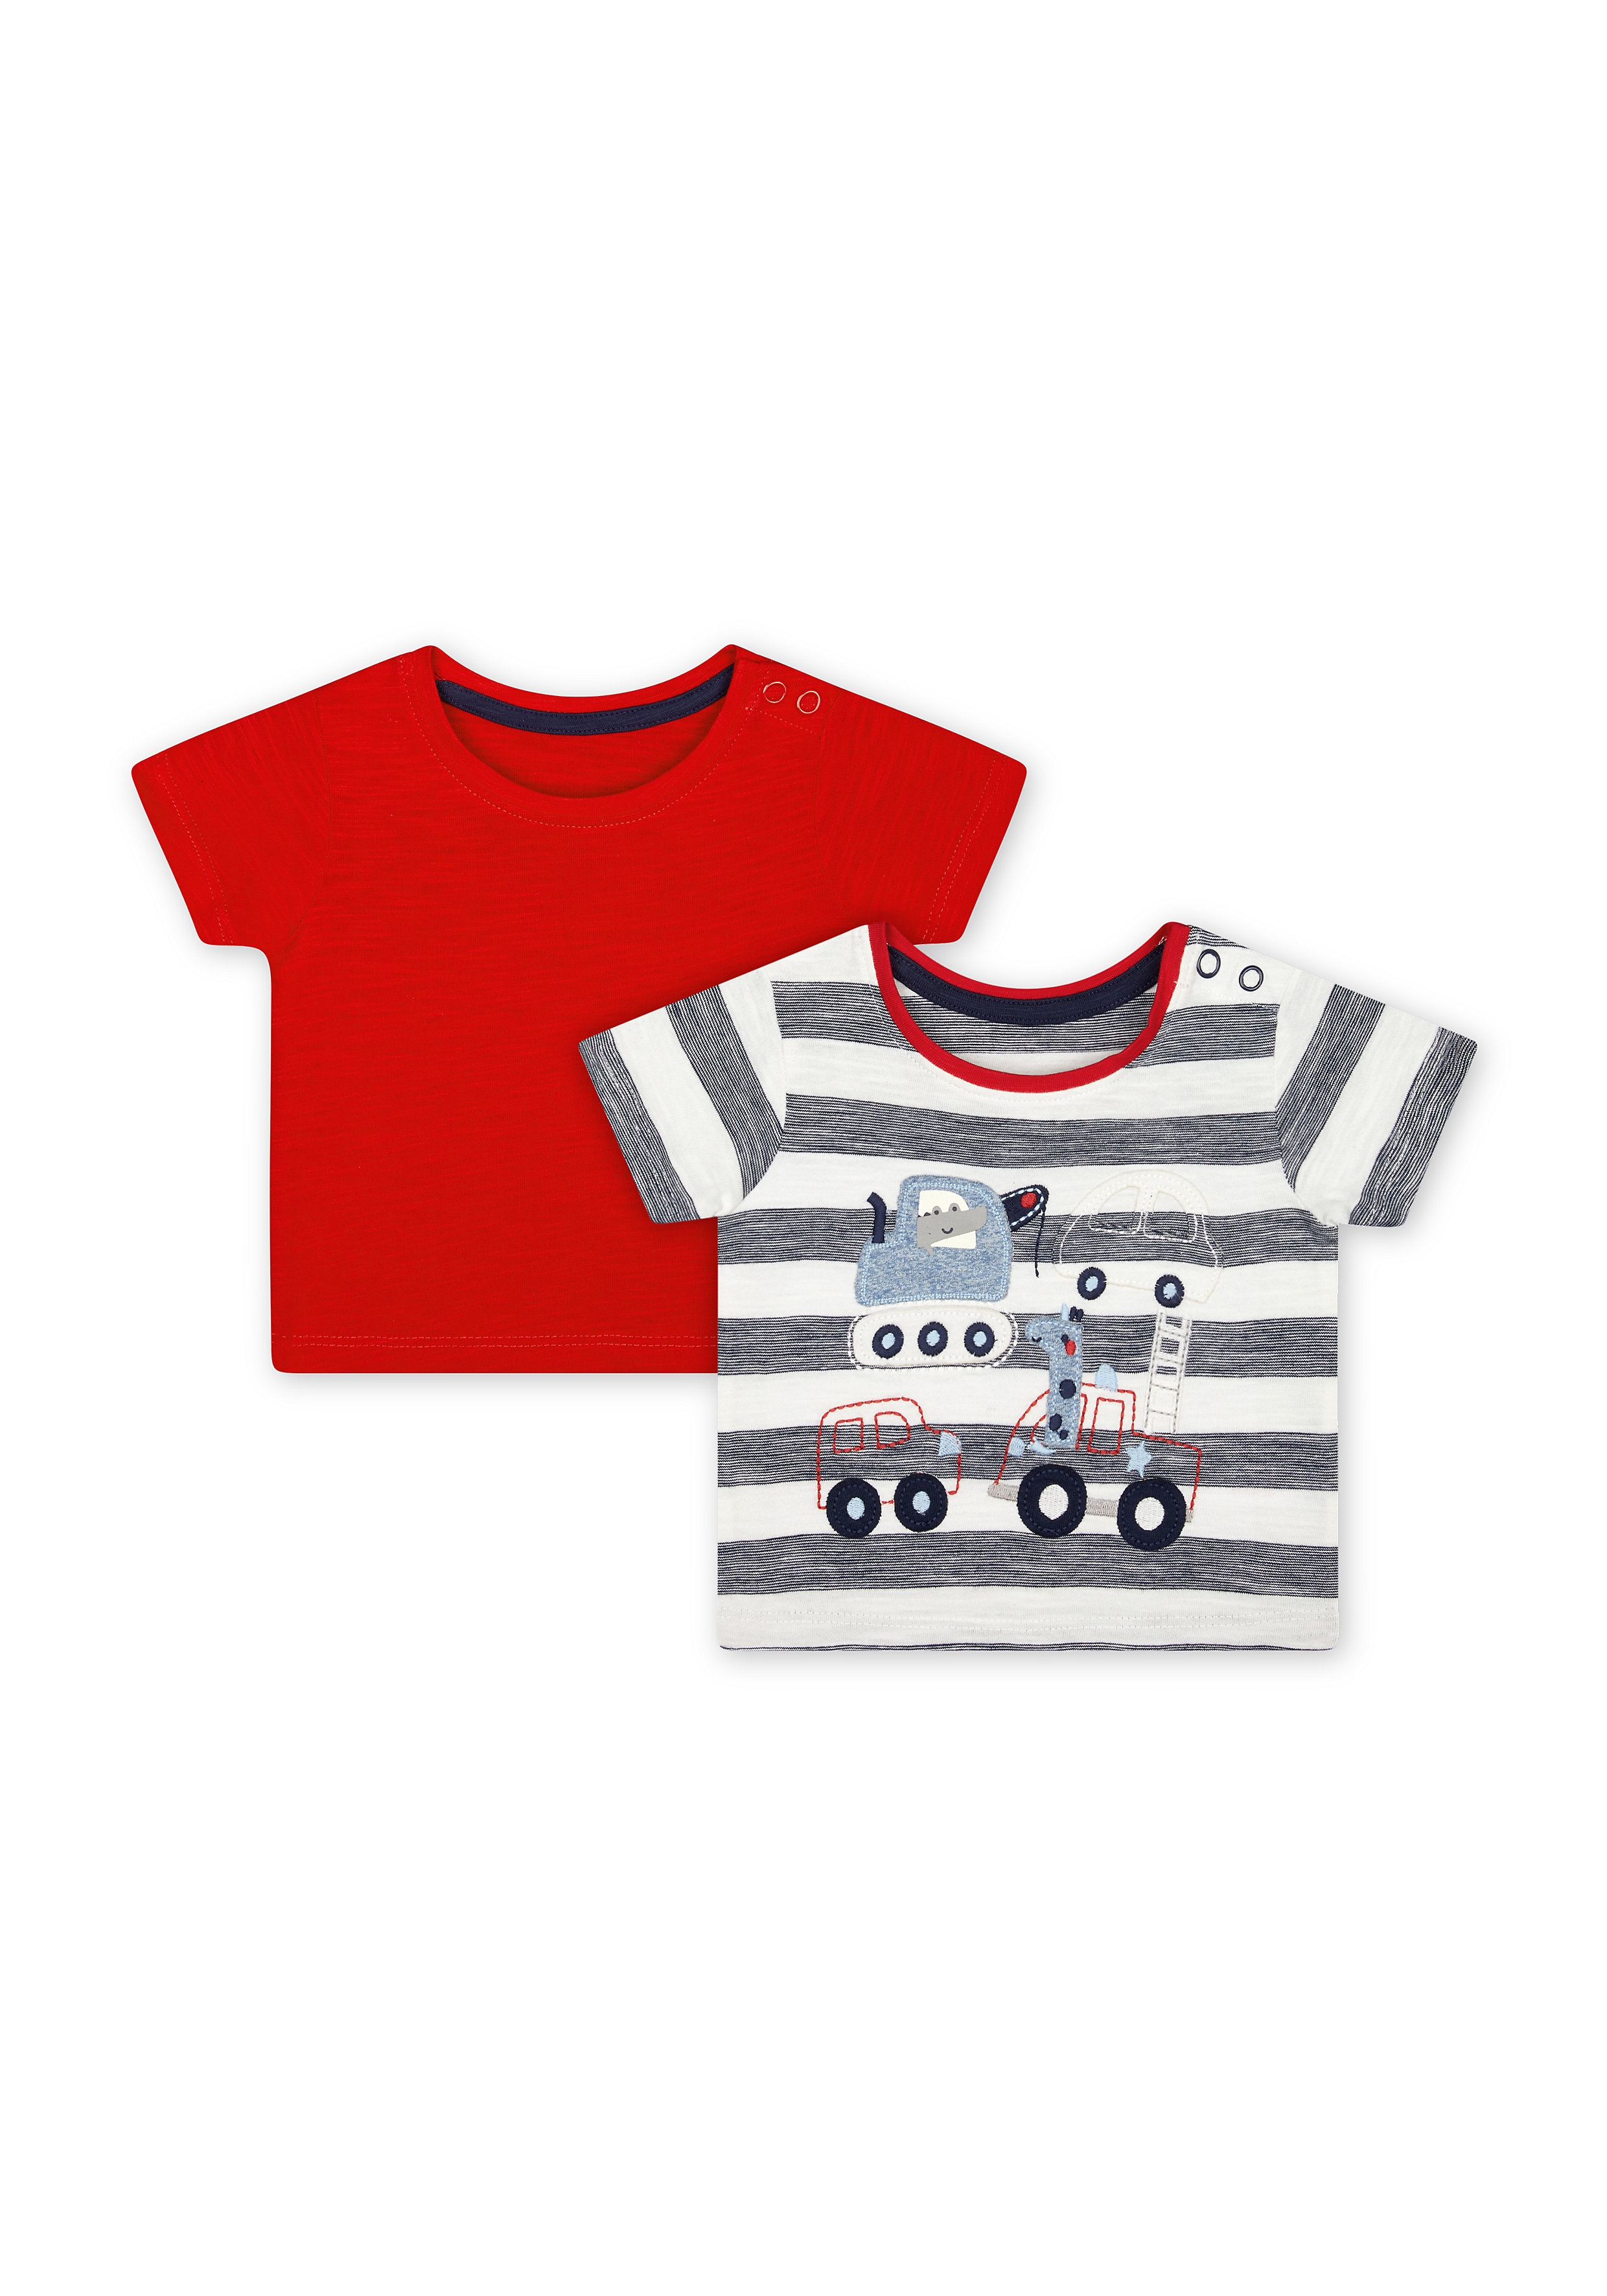 Mothercare | Boys Half Sleeves Round Neck T-shirts  - Pack Of 2 - Navy